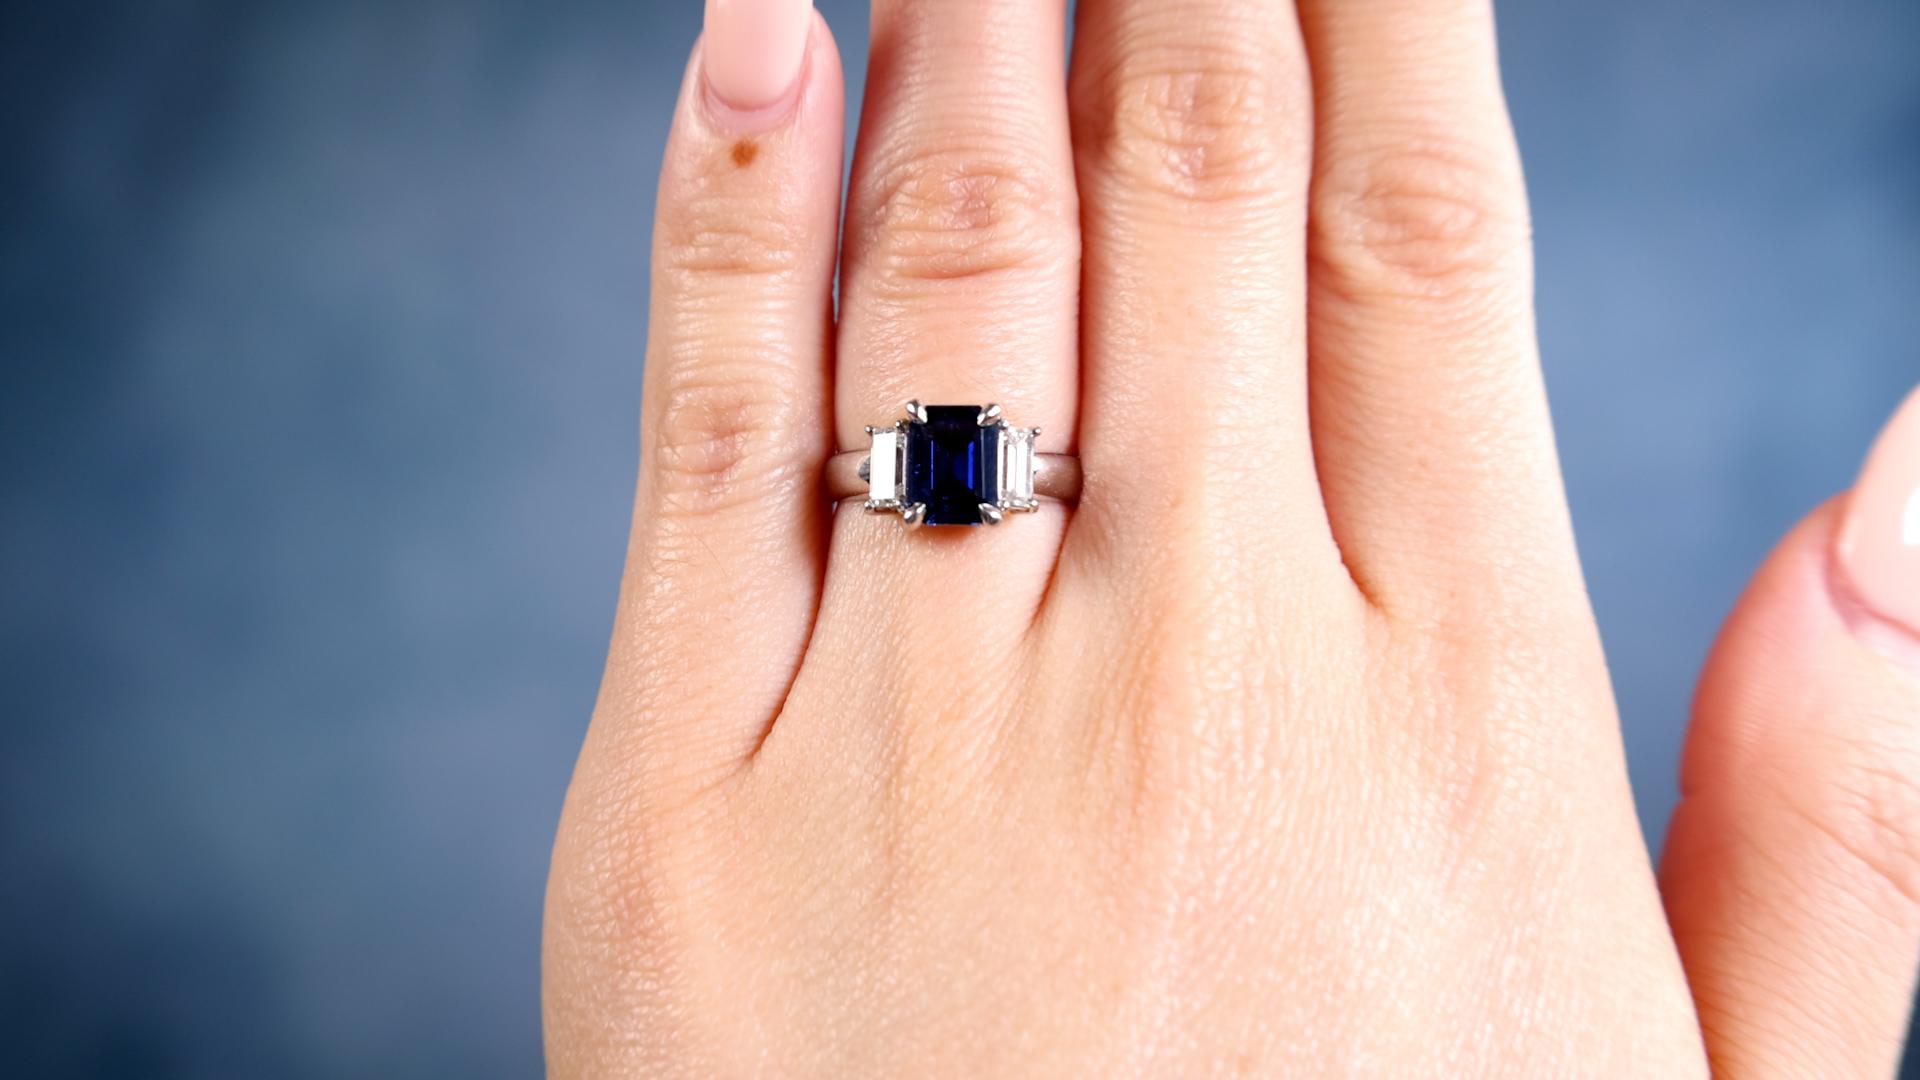 One Sapphire Diamond Platinum Ring. Featuring one octagonal step cut sapphire of 1.25 carats. Accented by two baguette cut diamonds with a total weight of 0.50 carat, graded F-G color, VS clarity. Crafted in platinum with purity mark and gemstone